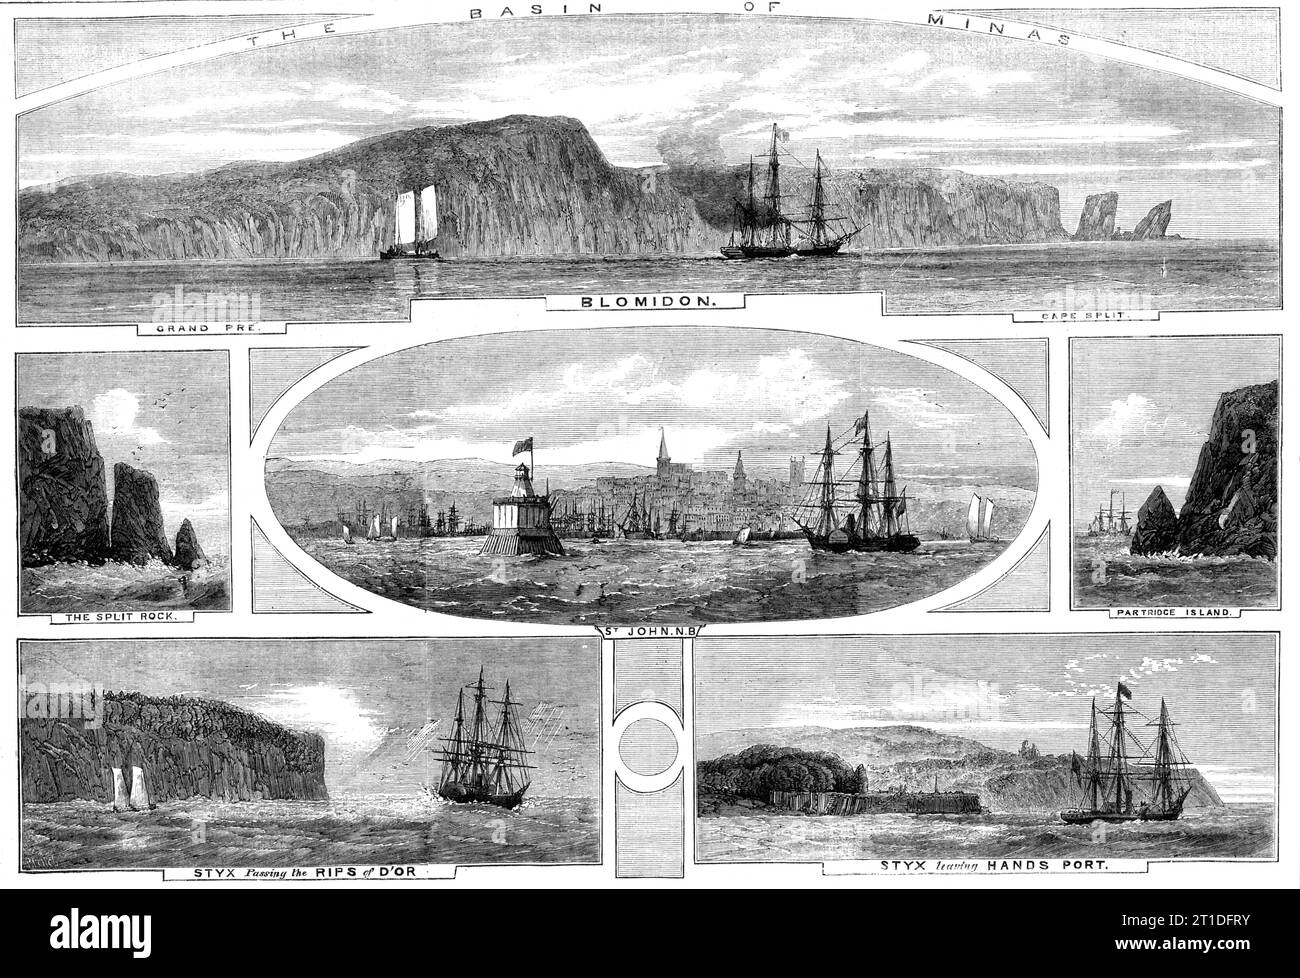 The Basin of Minas - Progress of the Prince of Wales in British North America - views illustrating the passage of H.M.S. &quot;Styx&quot;, having his Royal Highness on board, from Handsport to St. John, New Brunswick - from drawings by our special artist, G. H. Andrews, 1860. The future King Edward VII visits North America. 'Grand Pr&#xe9;; Blomidon; Cape Split; The Split Rock; St. John, New Brunswick; Partridge Island; Styx passing the Rips of D'Or; Styx leaving Hands Port'. From &quot;Illustrated London News&quot;, 1860. Stock Photo